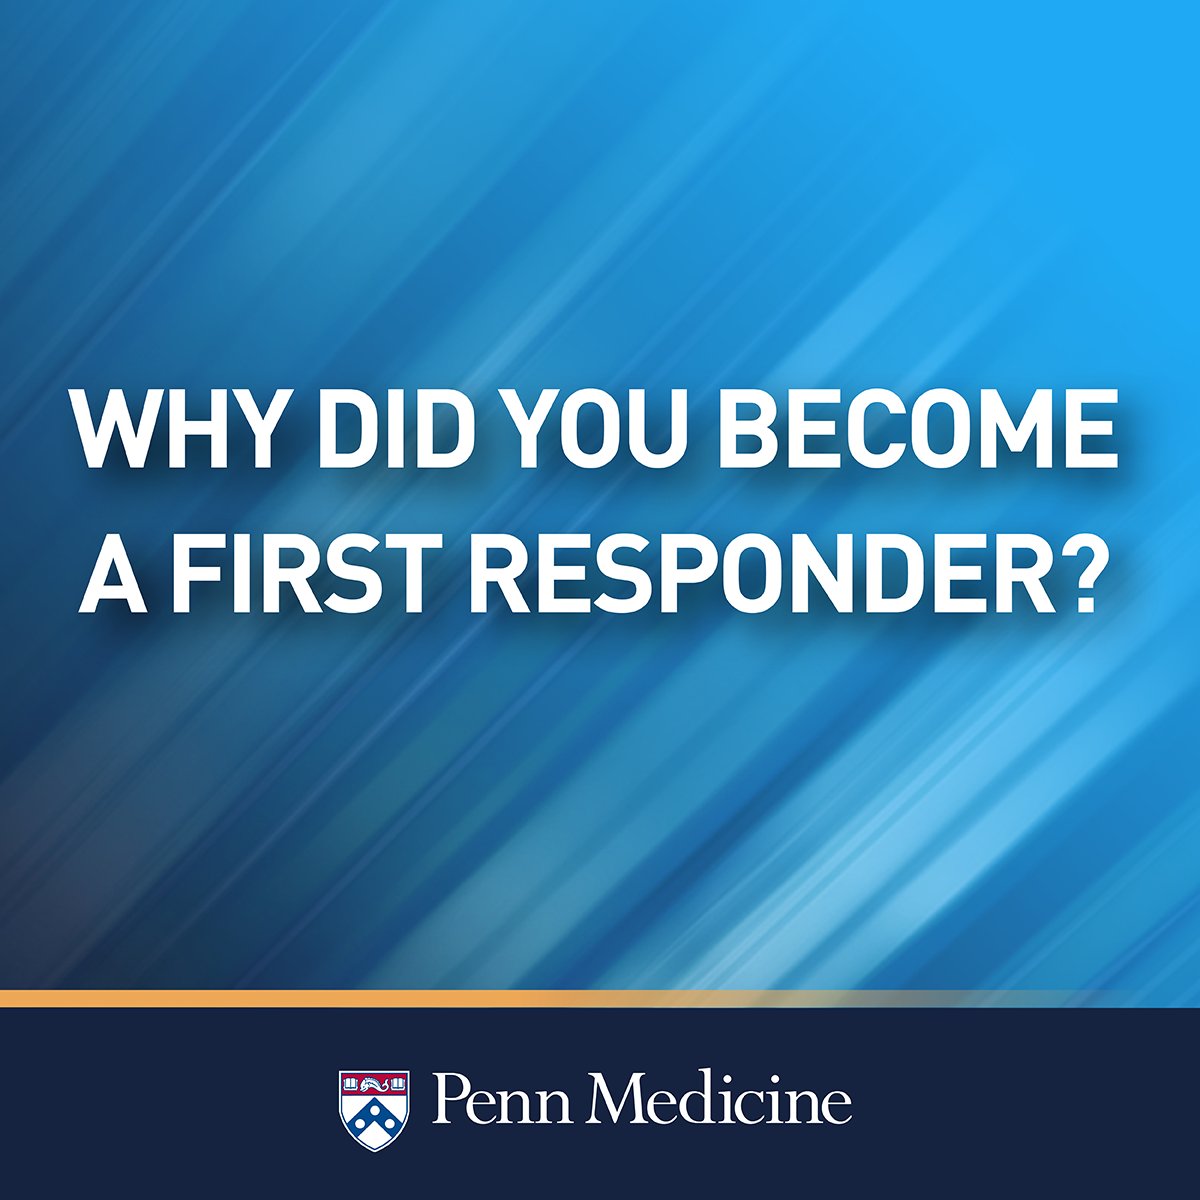 Why did you become a first responder? Reply with your story!